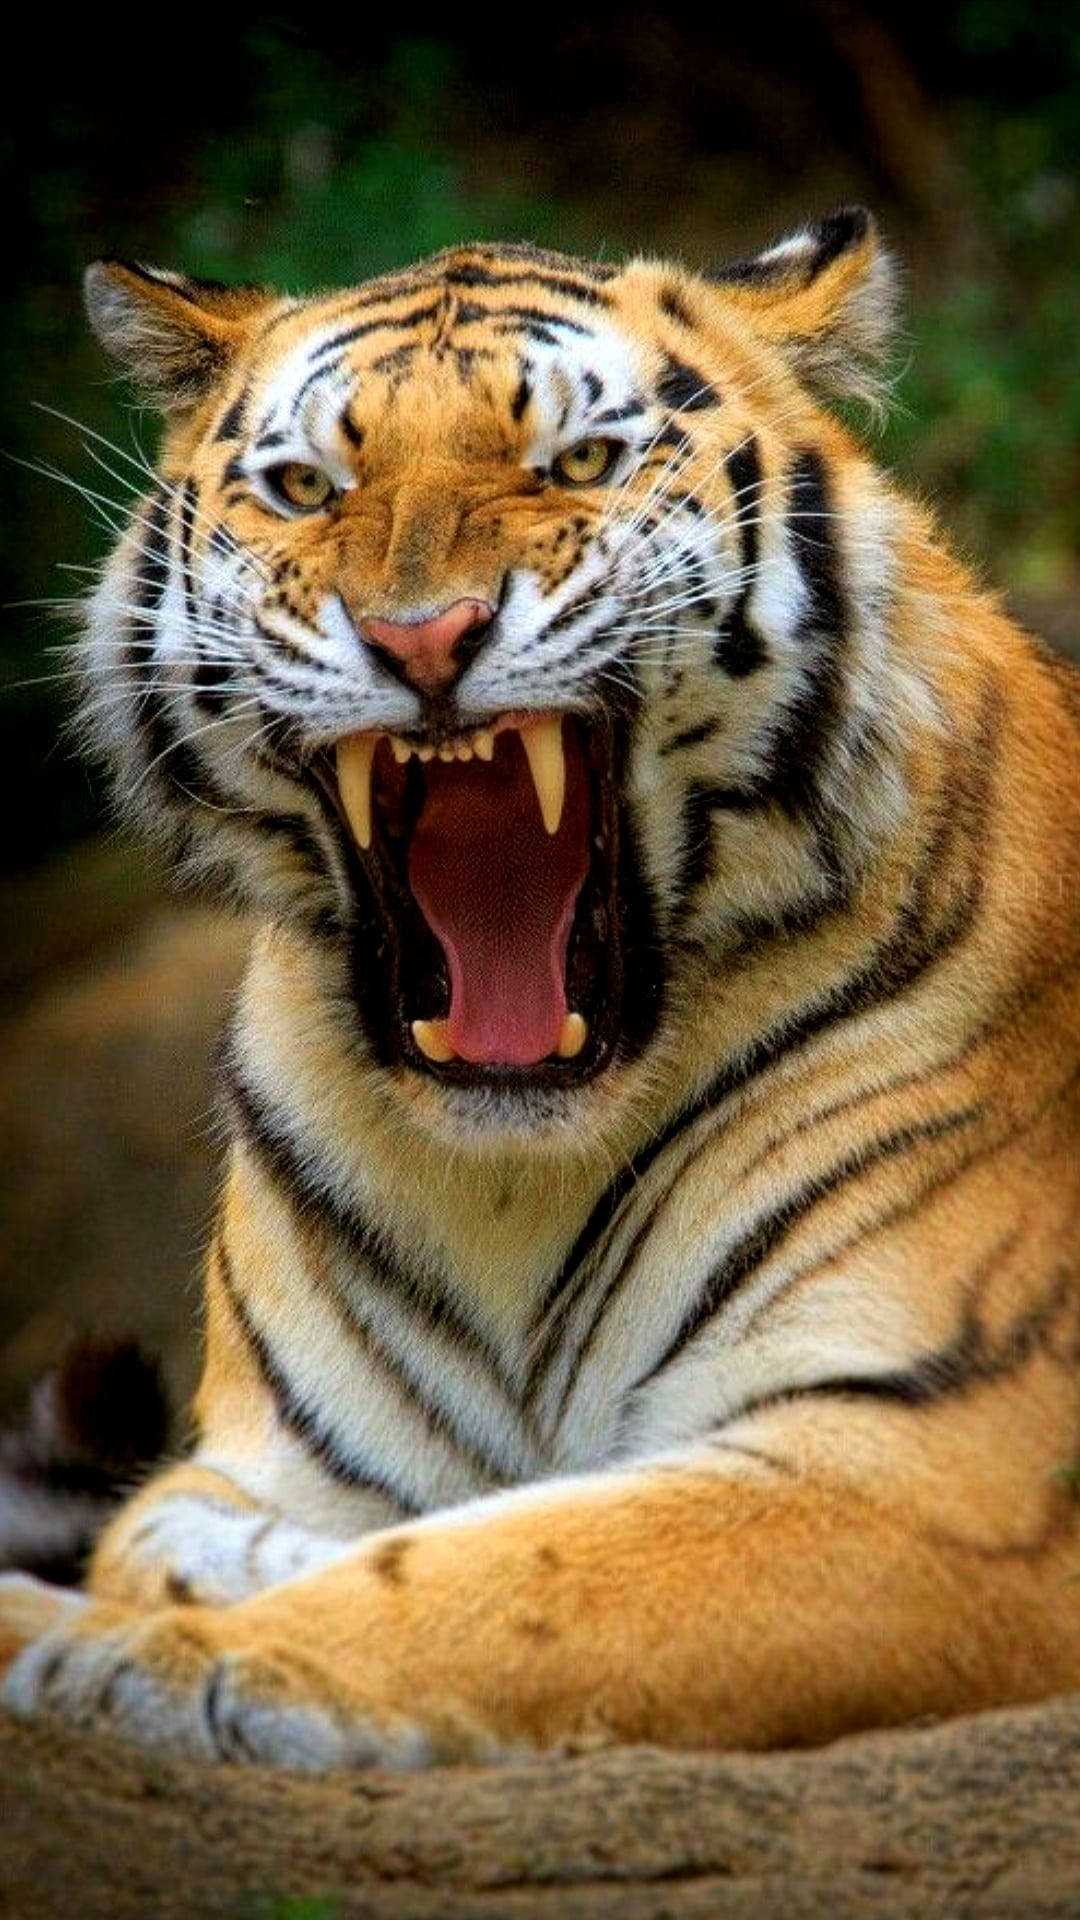 Portrait Of Big Angry Tiger Wallpaper